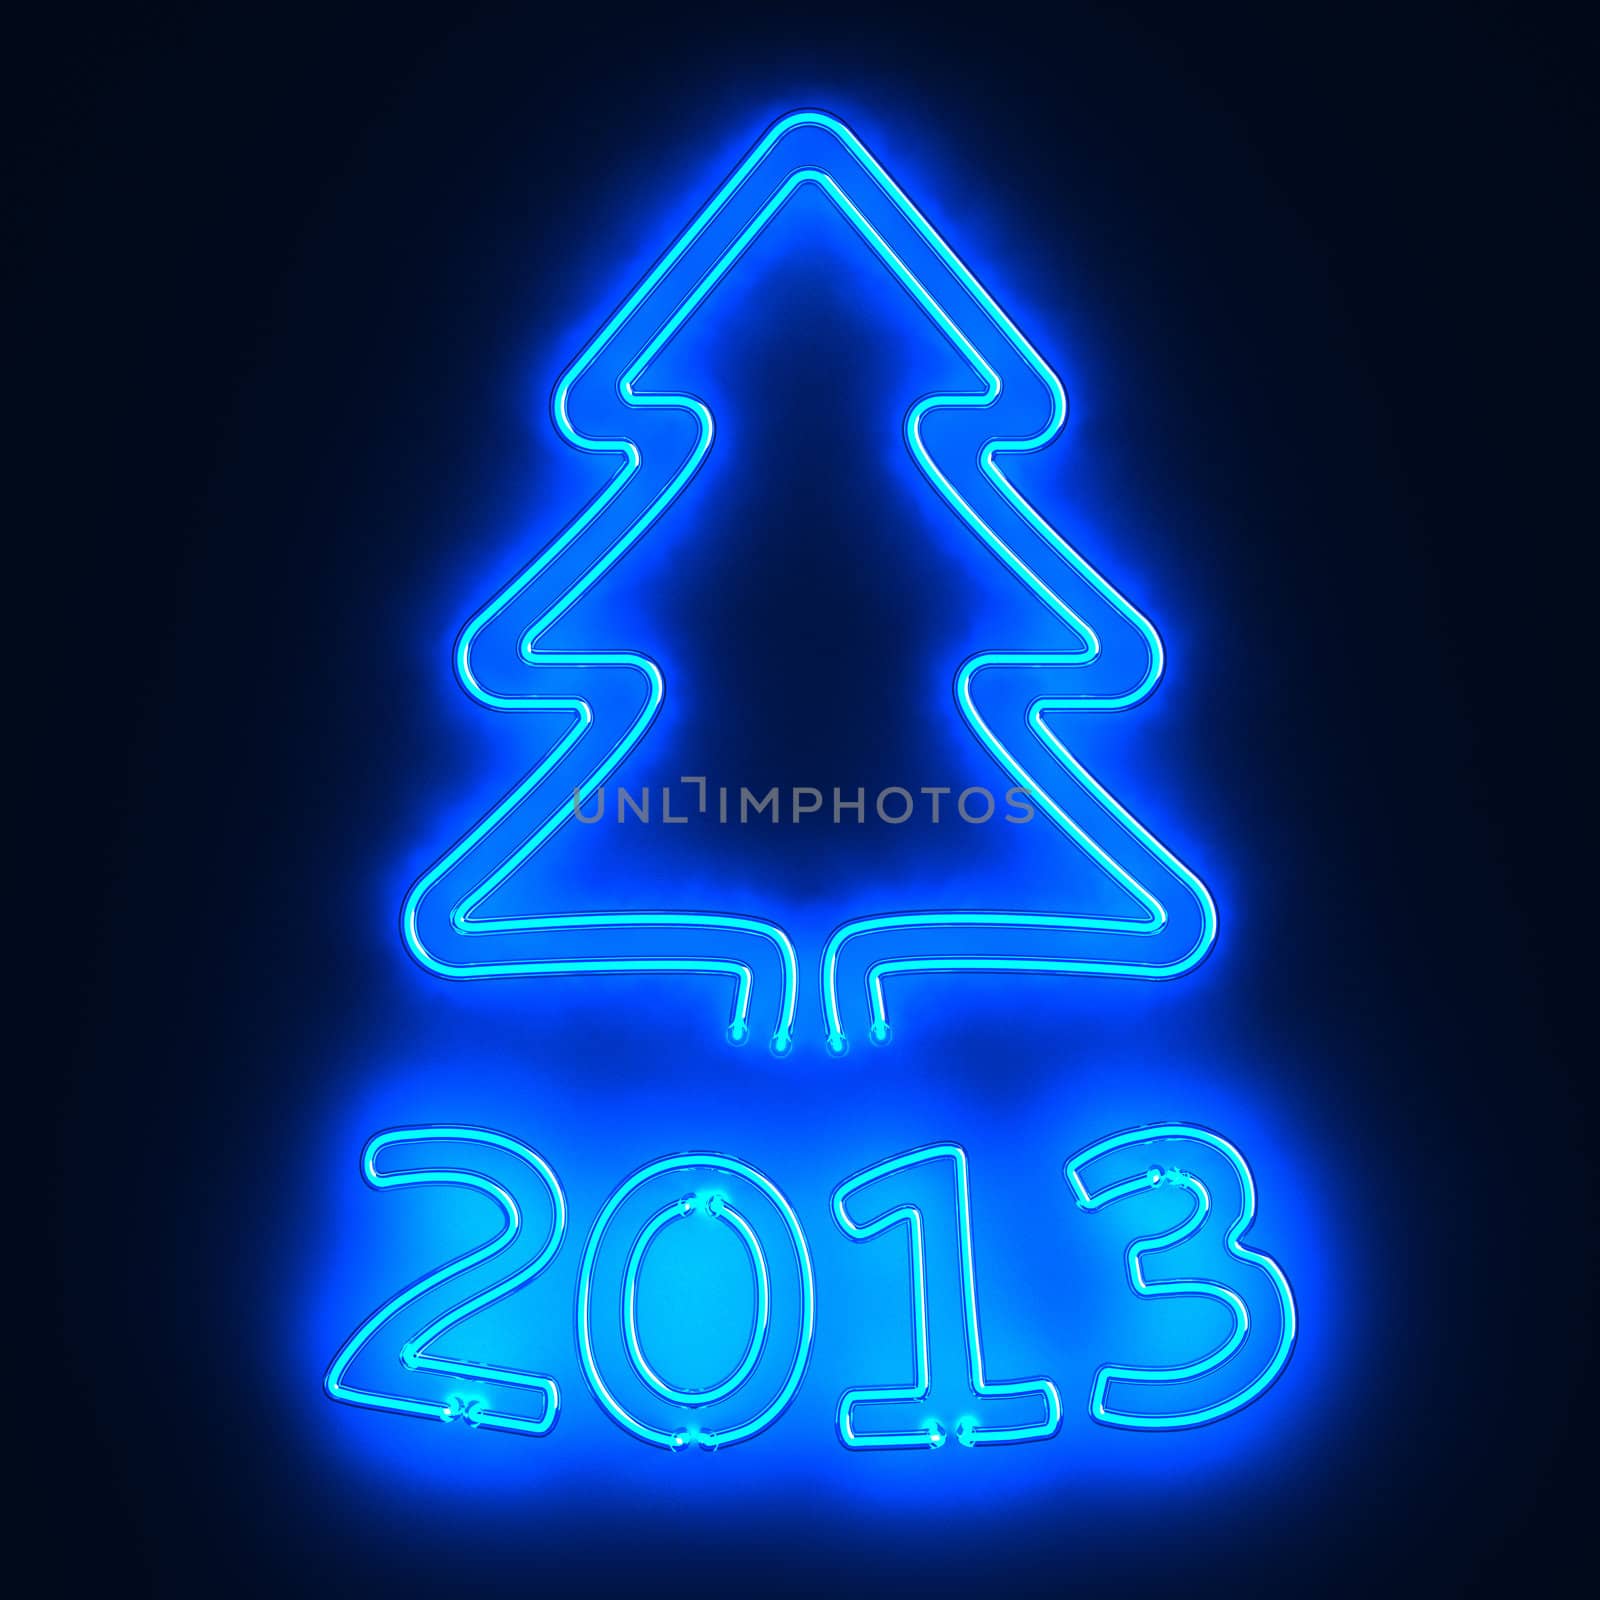 Glowing neon sign 2013 and christmas tree